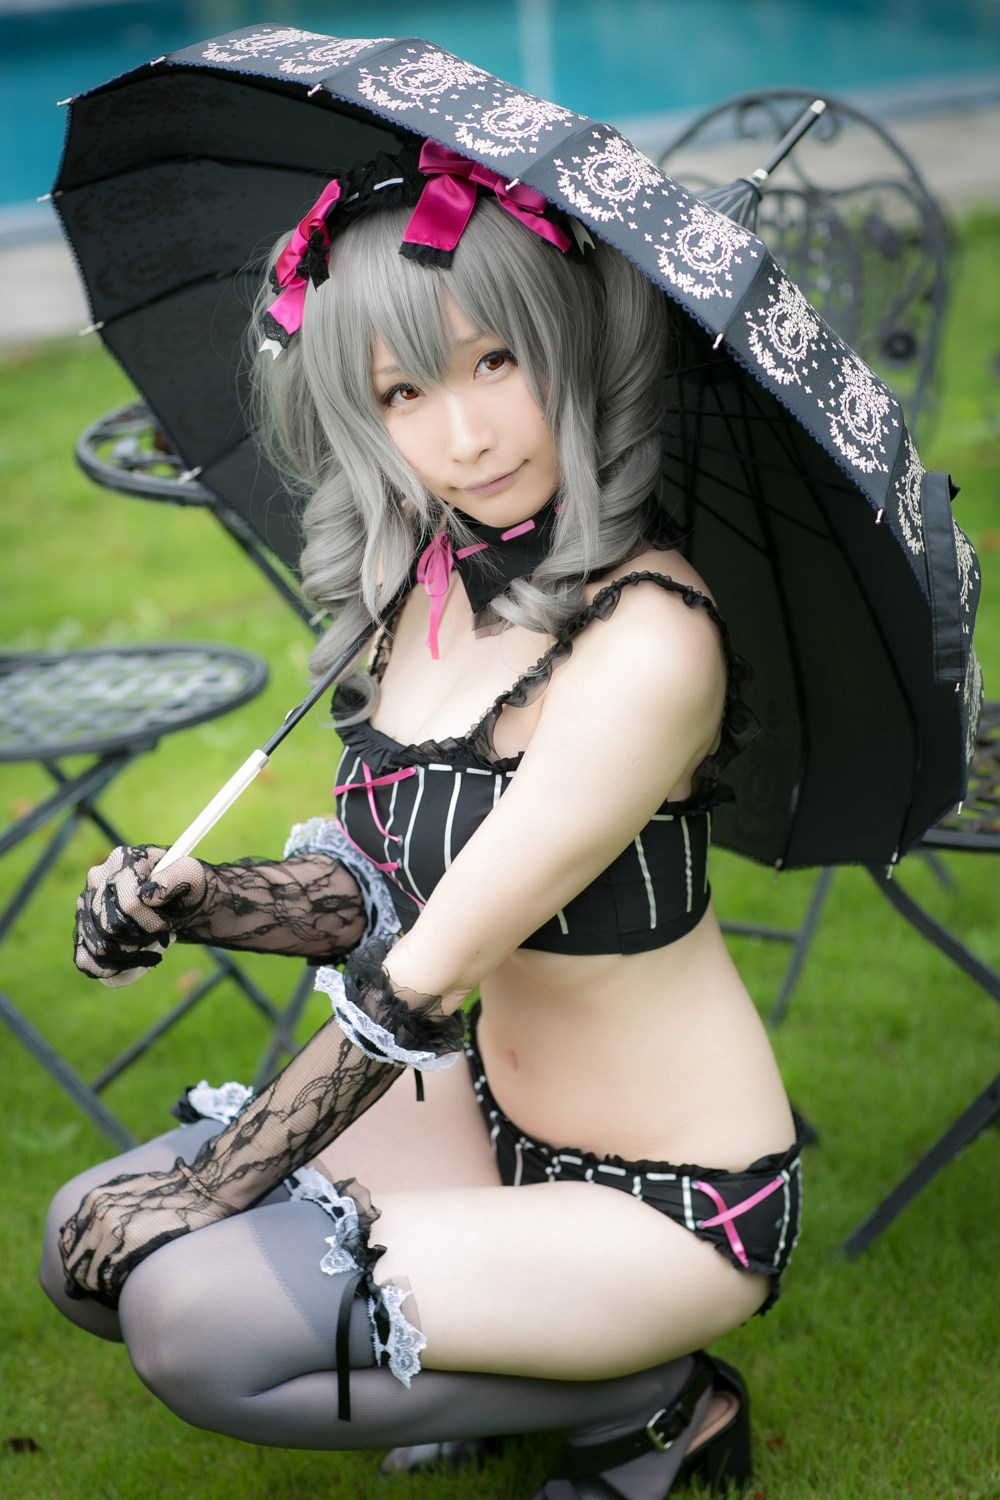 The combination of beautiful swimsuit and umbrella(5)